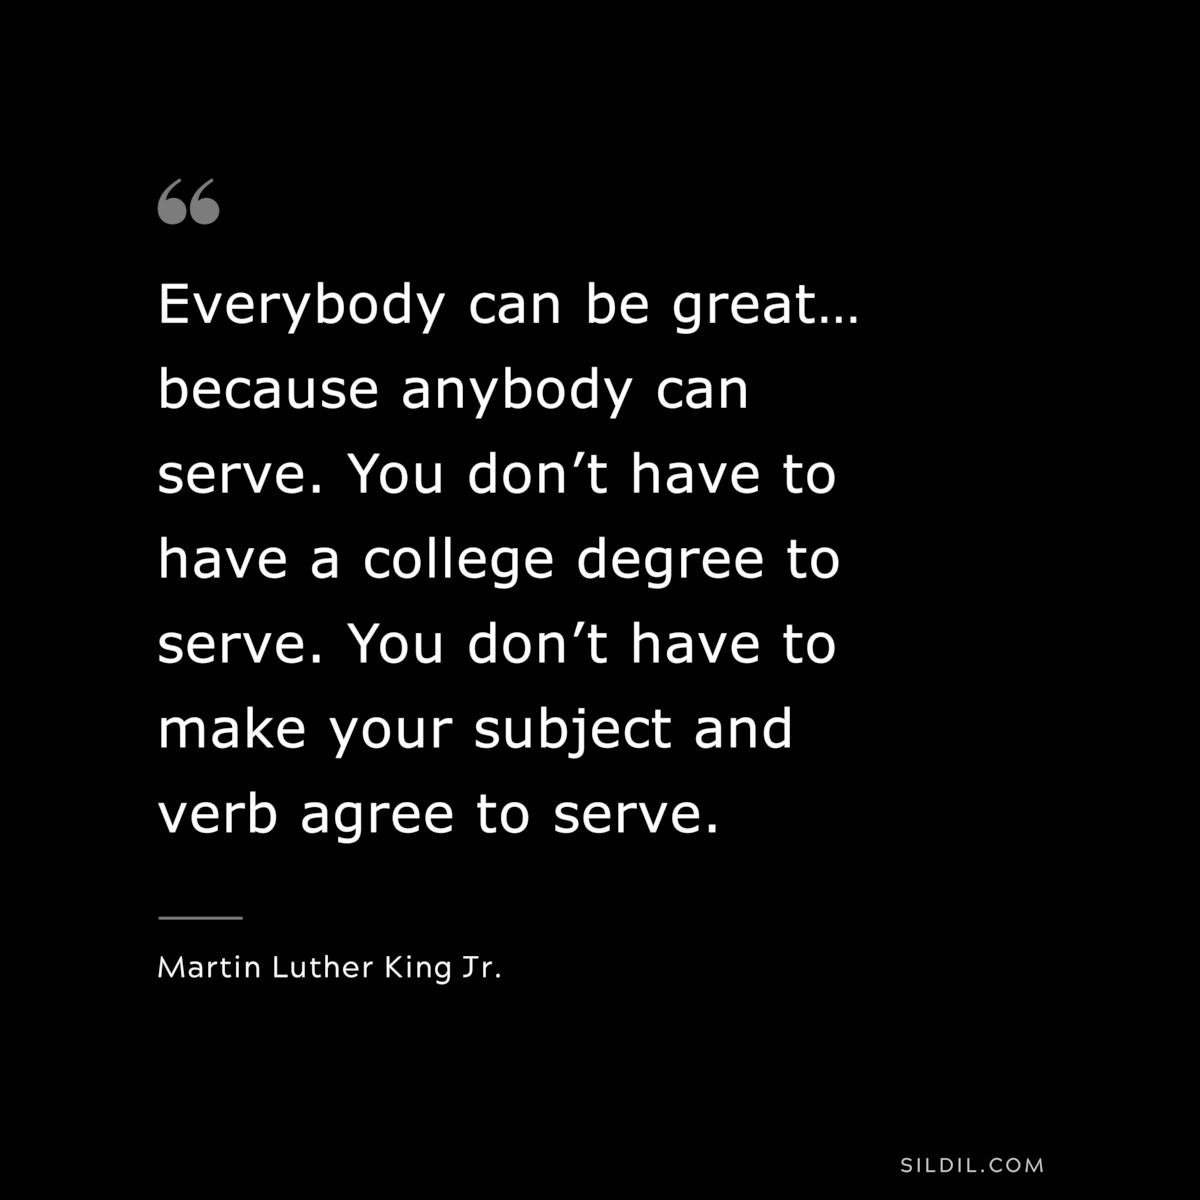 Everybody can be great… because anybody can serve. You don’t have to have a college degree to serve. You don’t have to make your subject and verb agree to serve. ― Martin Luther King Jr.